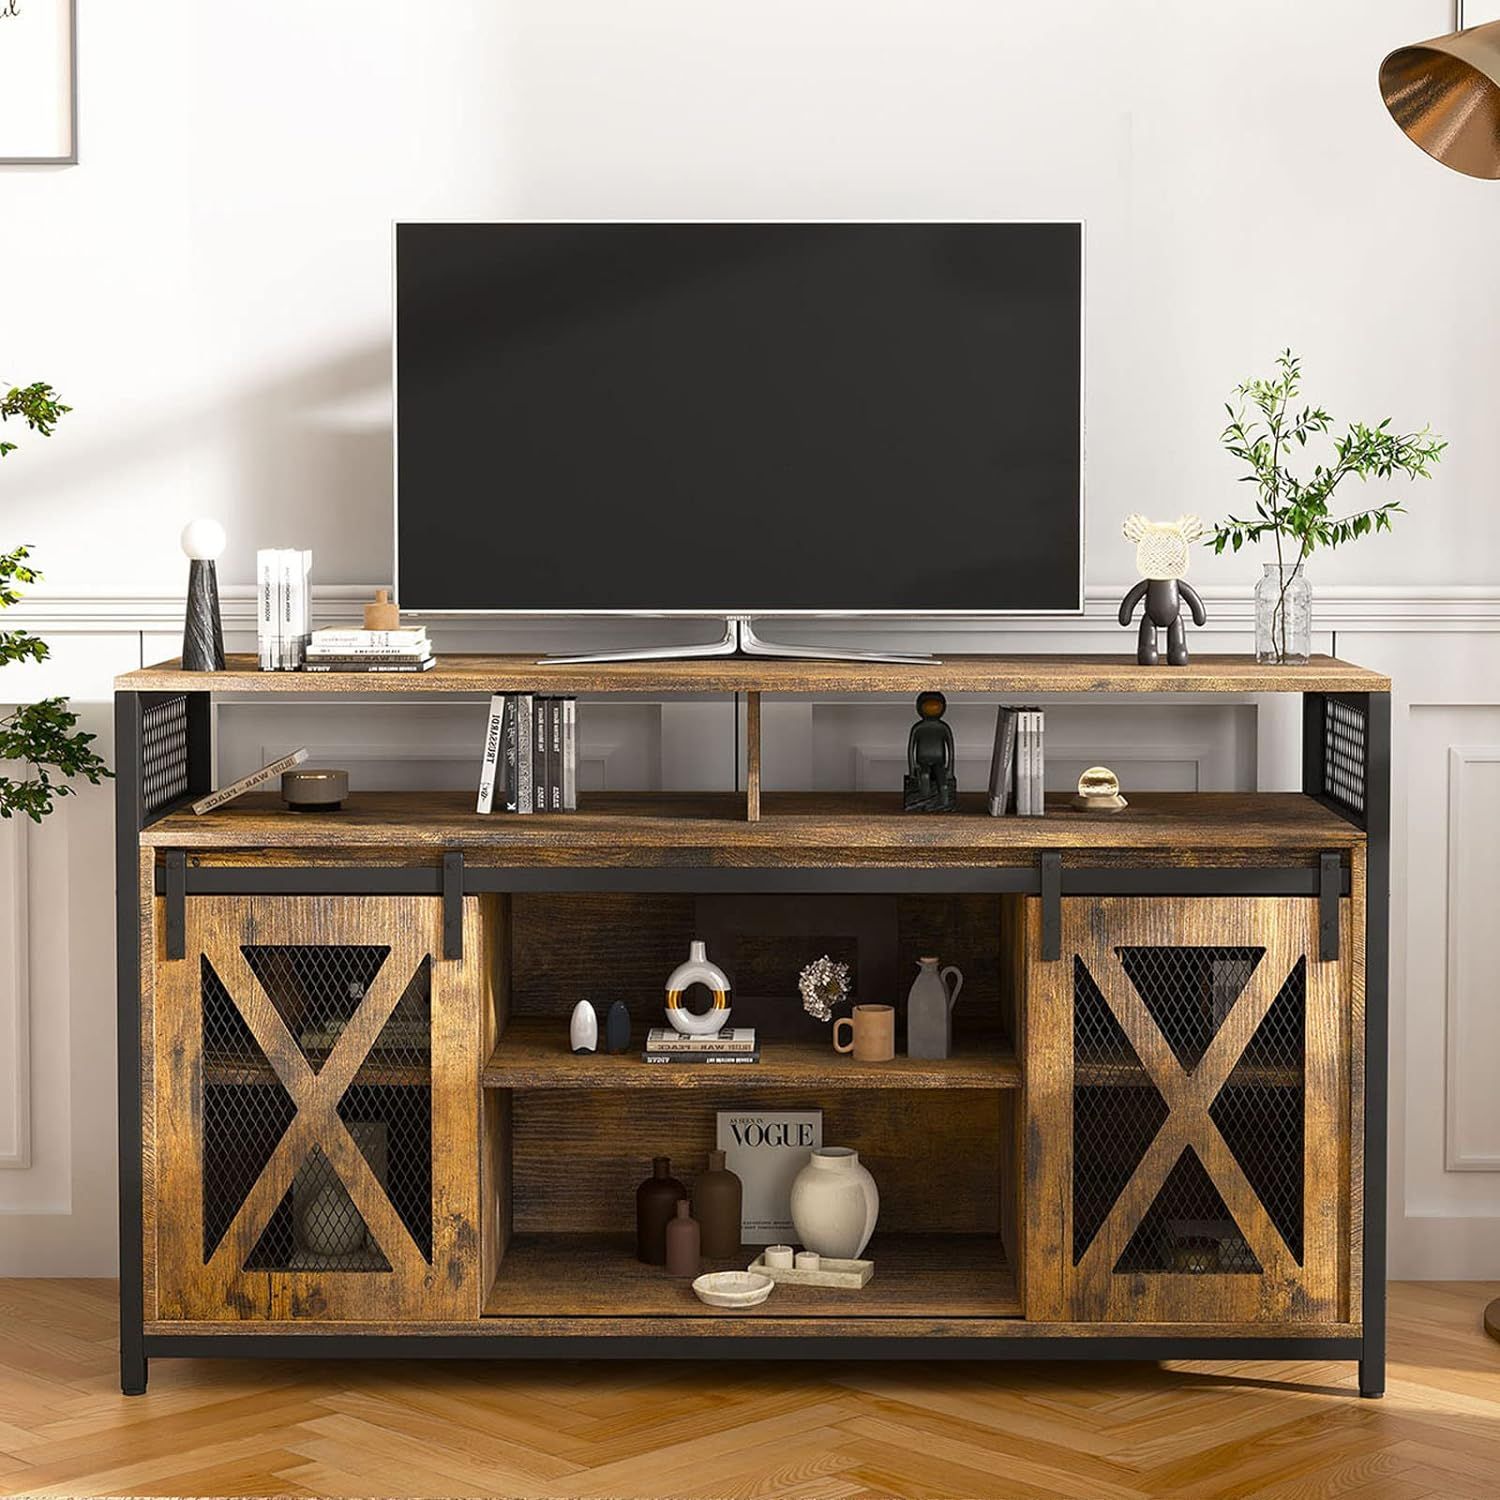 Nolany Tv Stand With Sliding Barn Doors, India | Ubuy Throughout Barn Door Media Tv Stands (Photo 10 of 15)